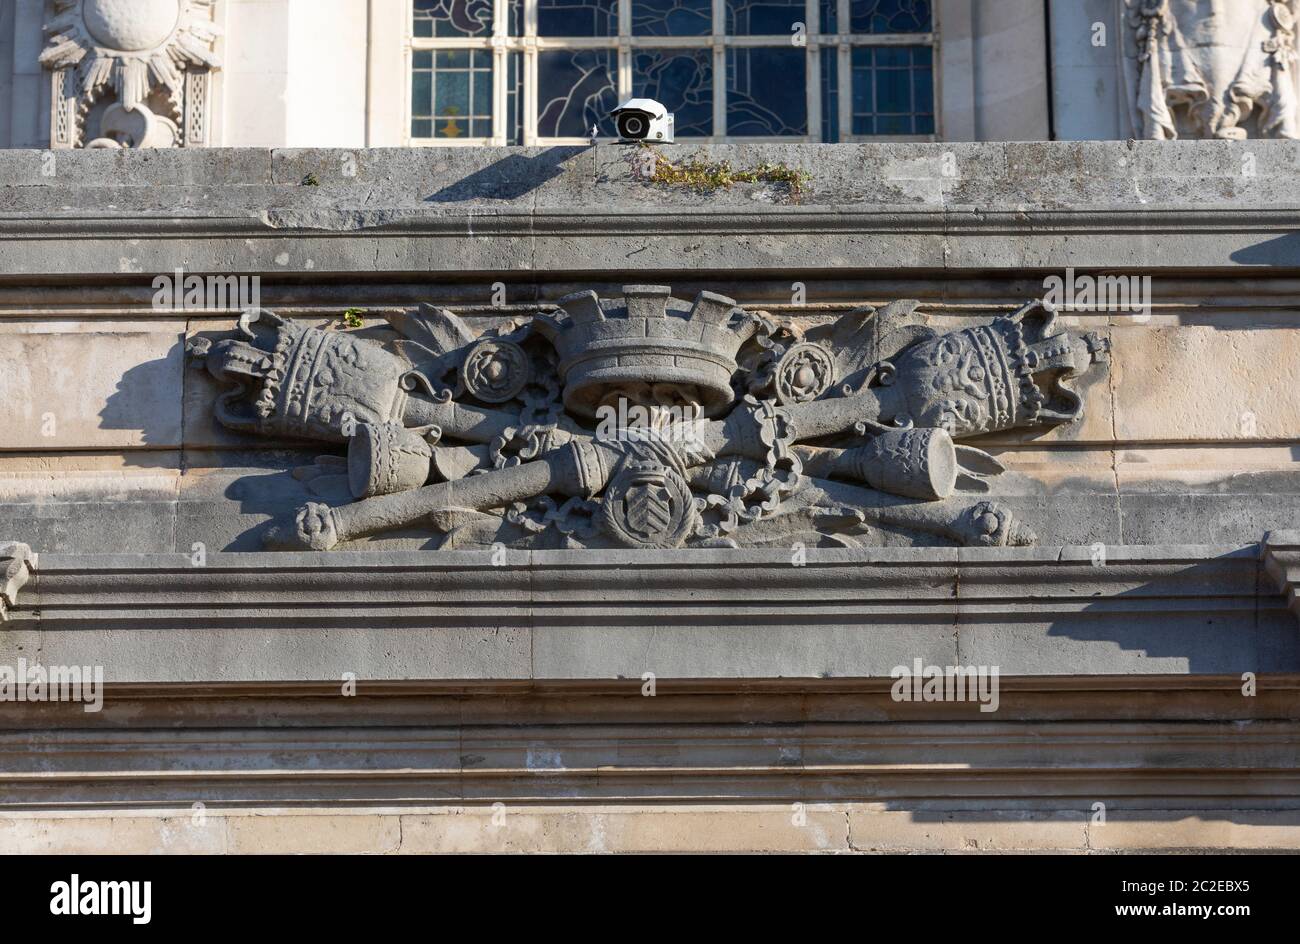 Ornate stone work above the entrance portico of the City Hall in Cardiff, Wales, UK Stock Photo